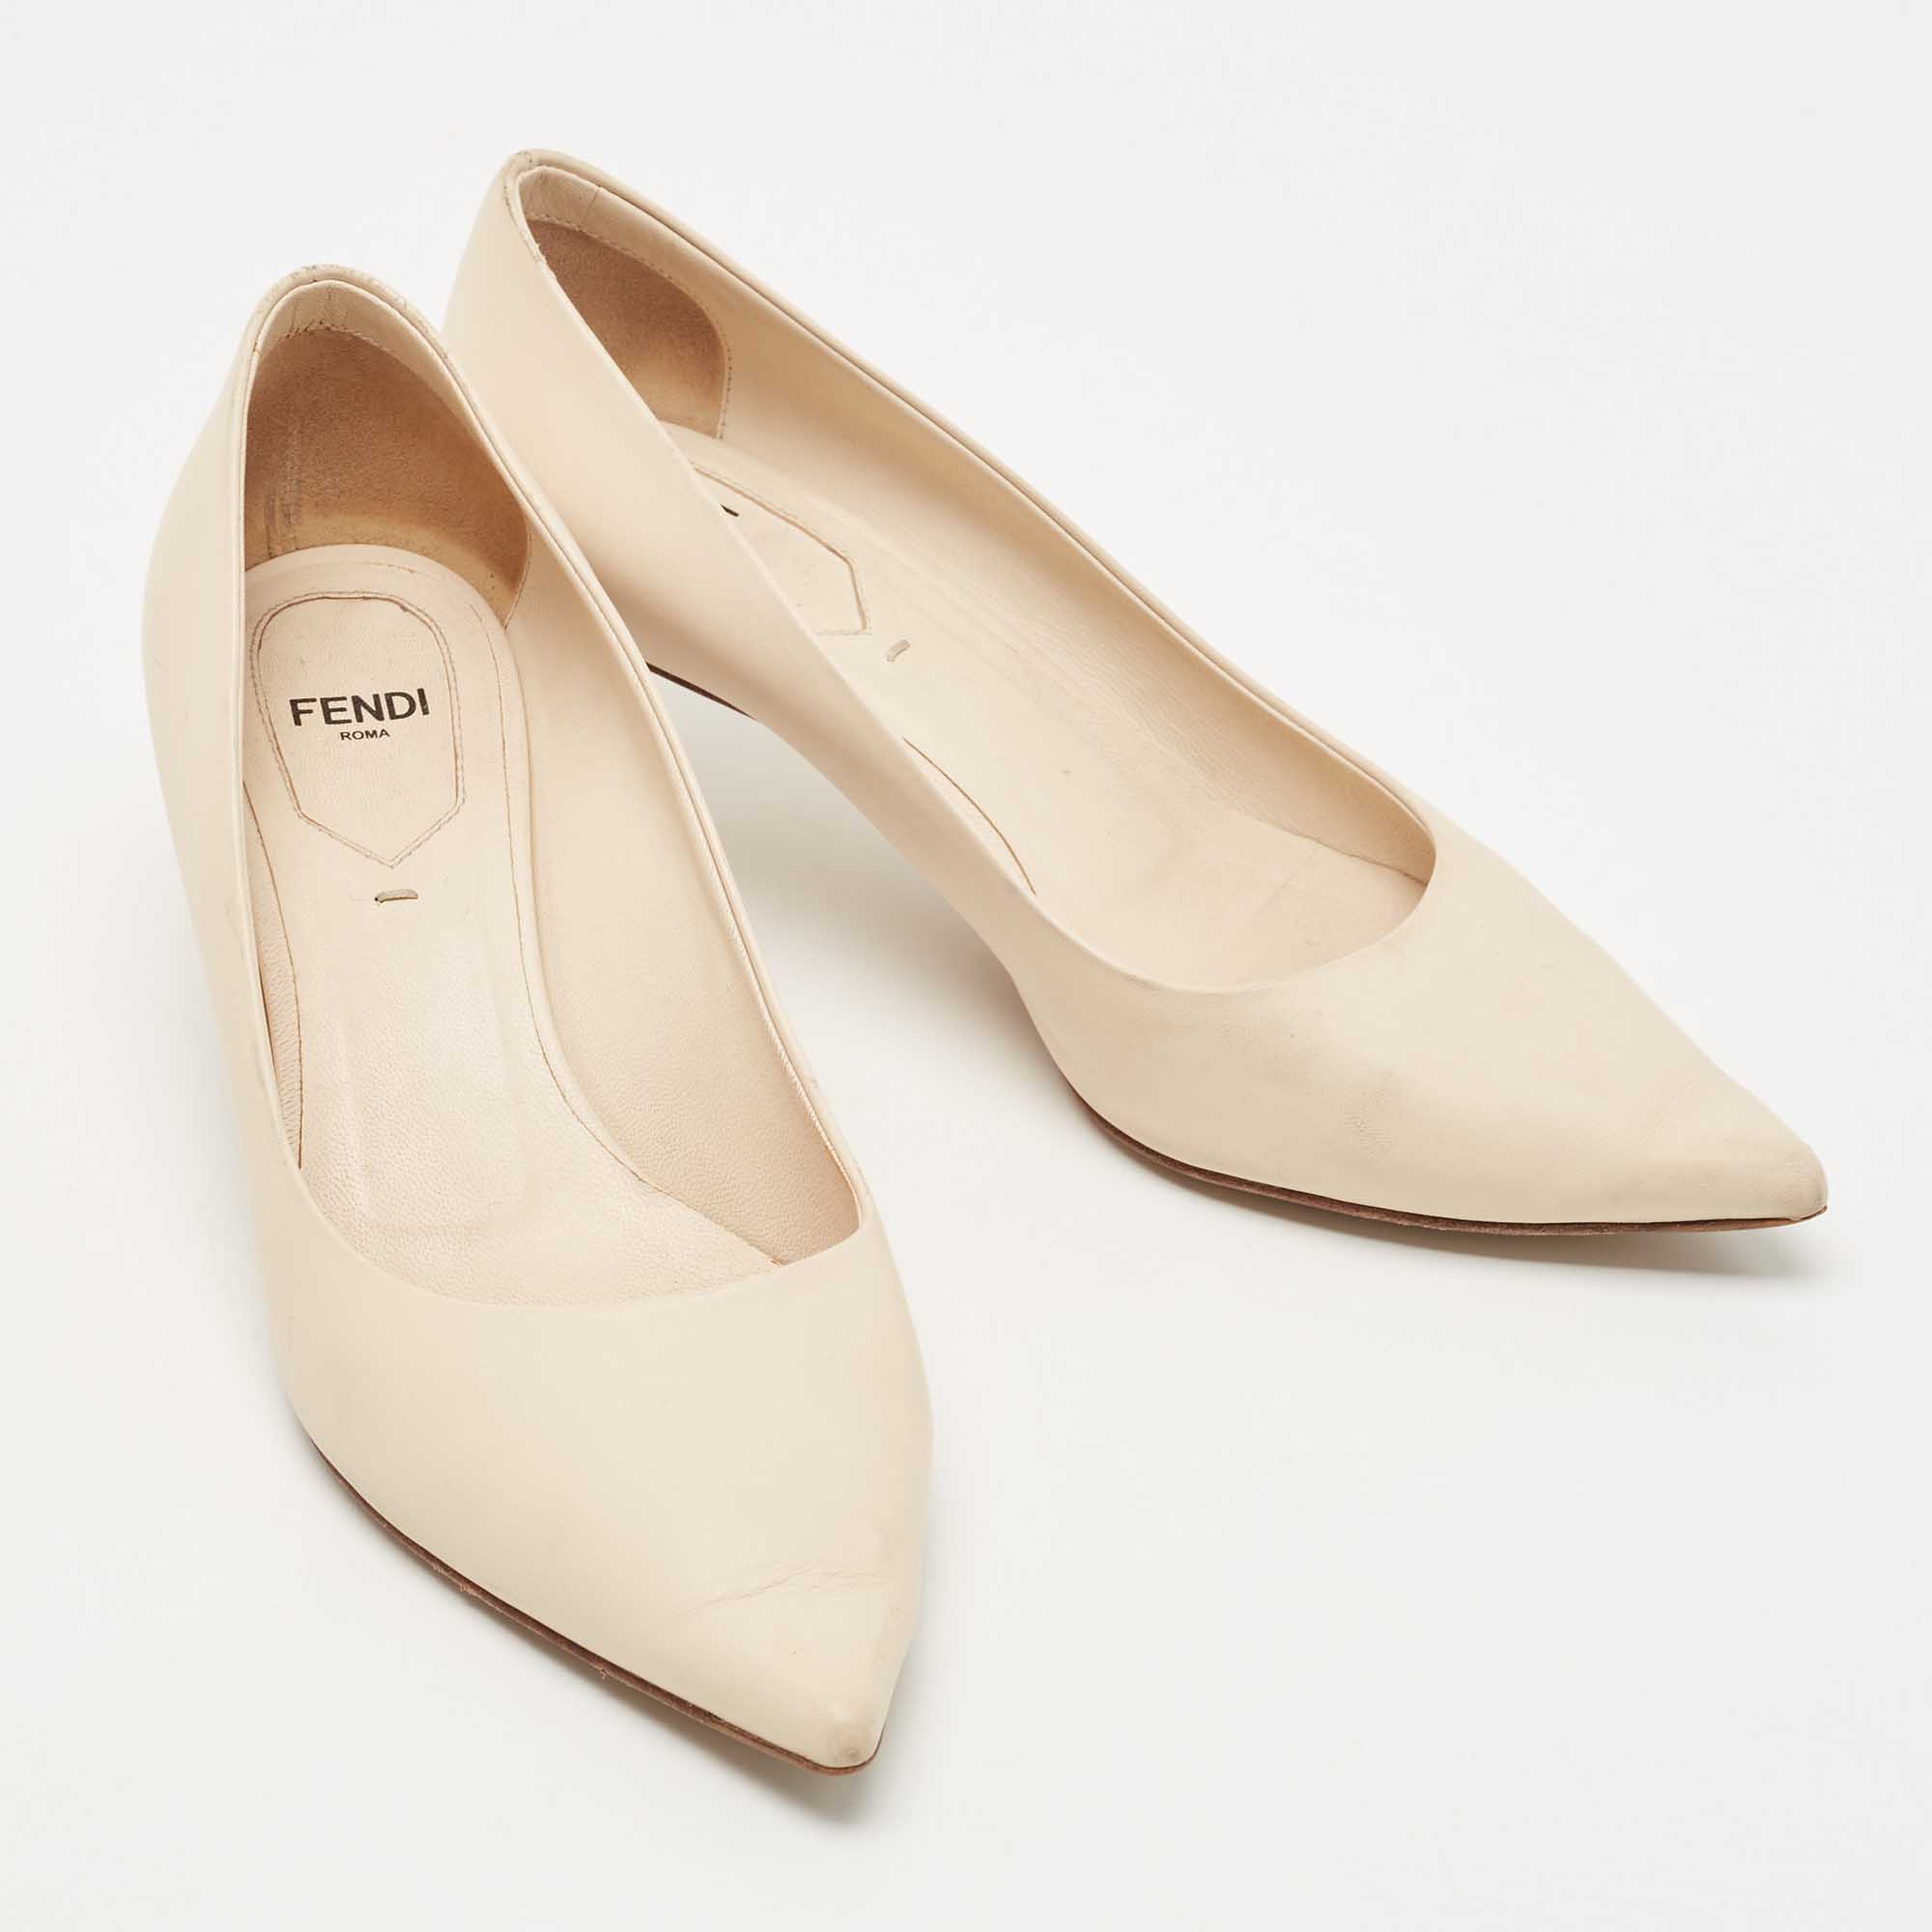 Fendi Beige Leather Pointed Toe Pumps Size 36